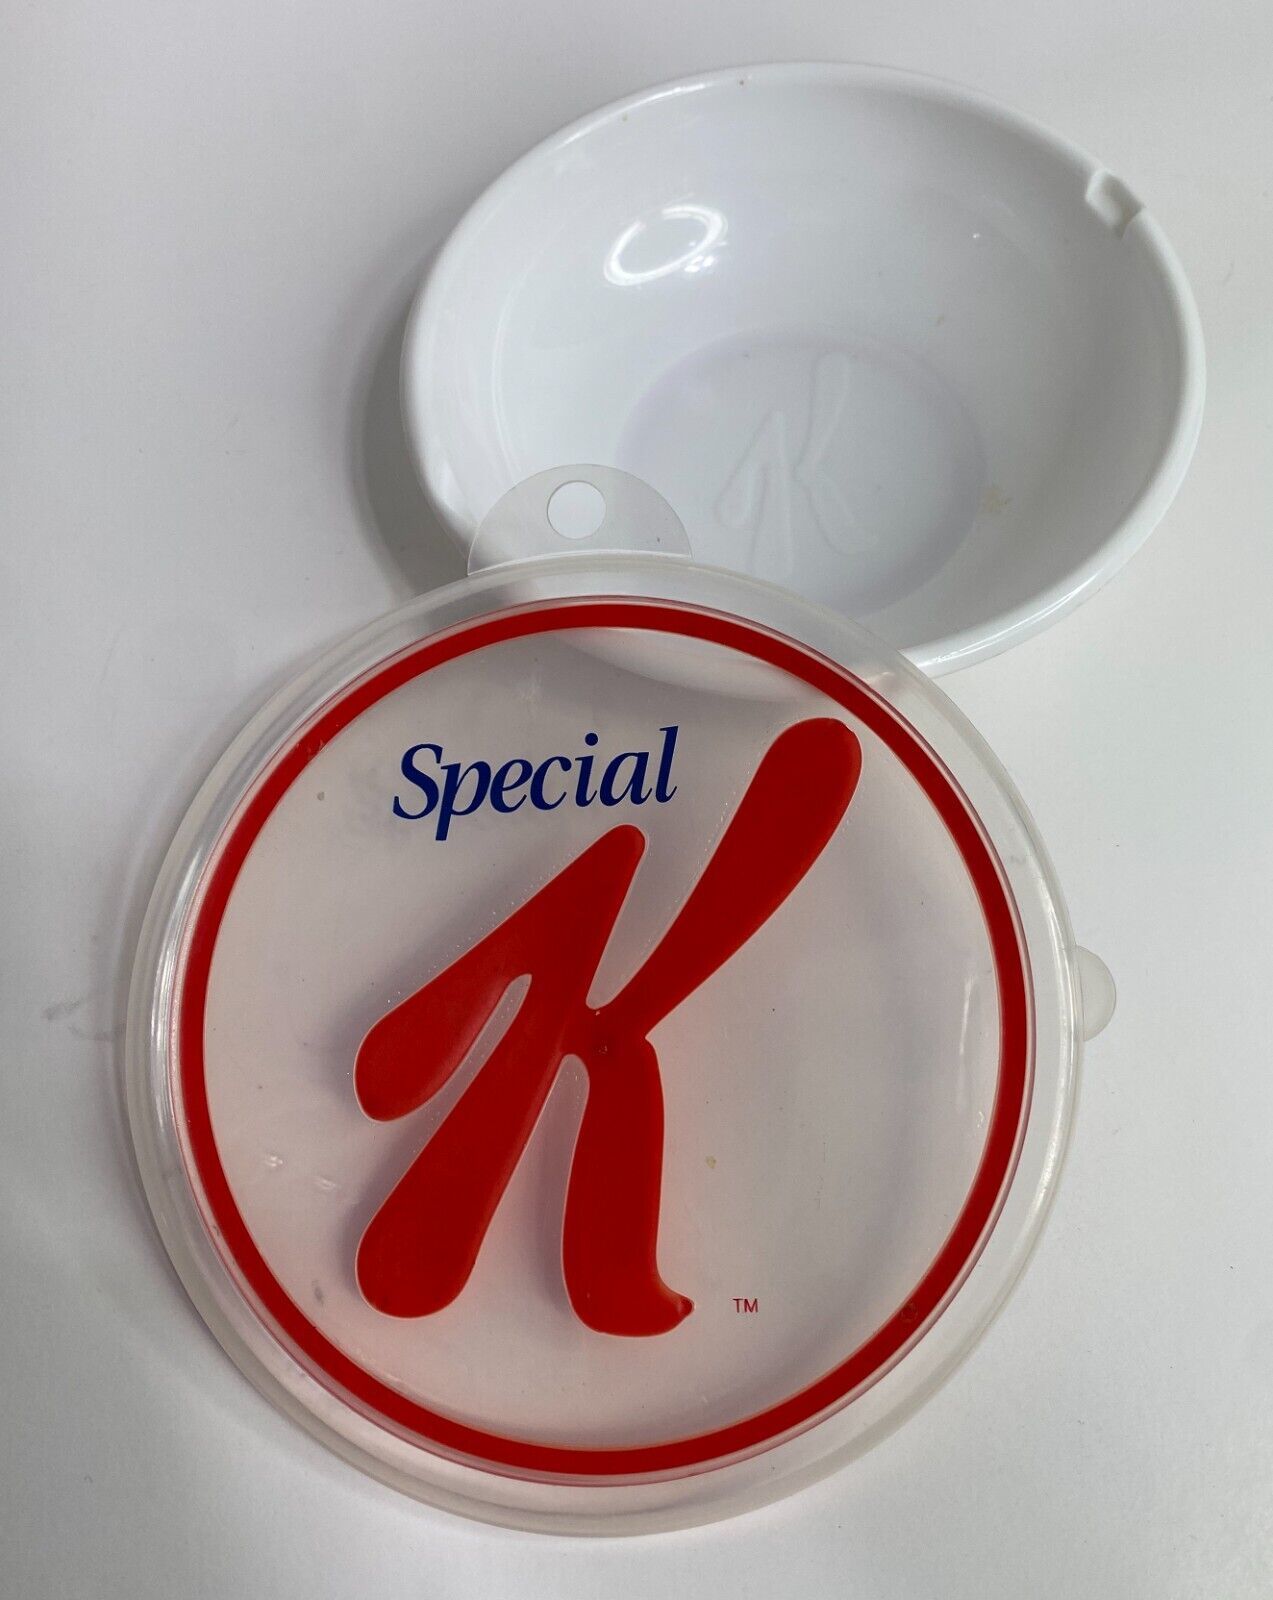 Kellogg's Special K Promotional Cereal Bowl with Lid - Vintage 2005 Red White - $19.95